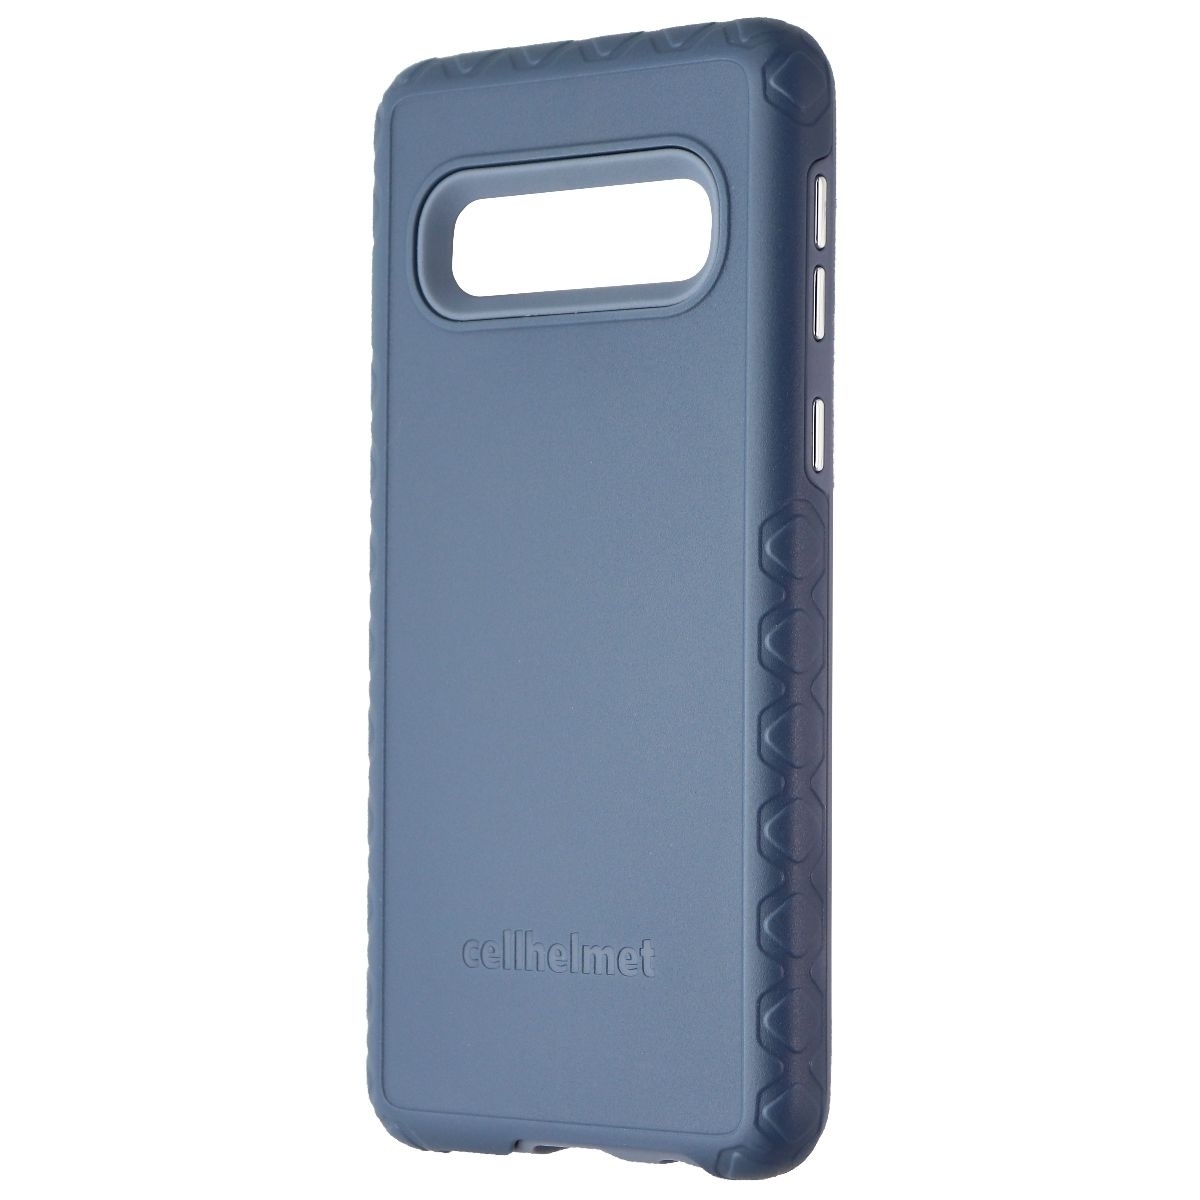 CellHelmet Fortitude PRO Series Case For Samsung Galaxy S10 - Slate Blue